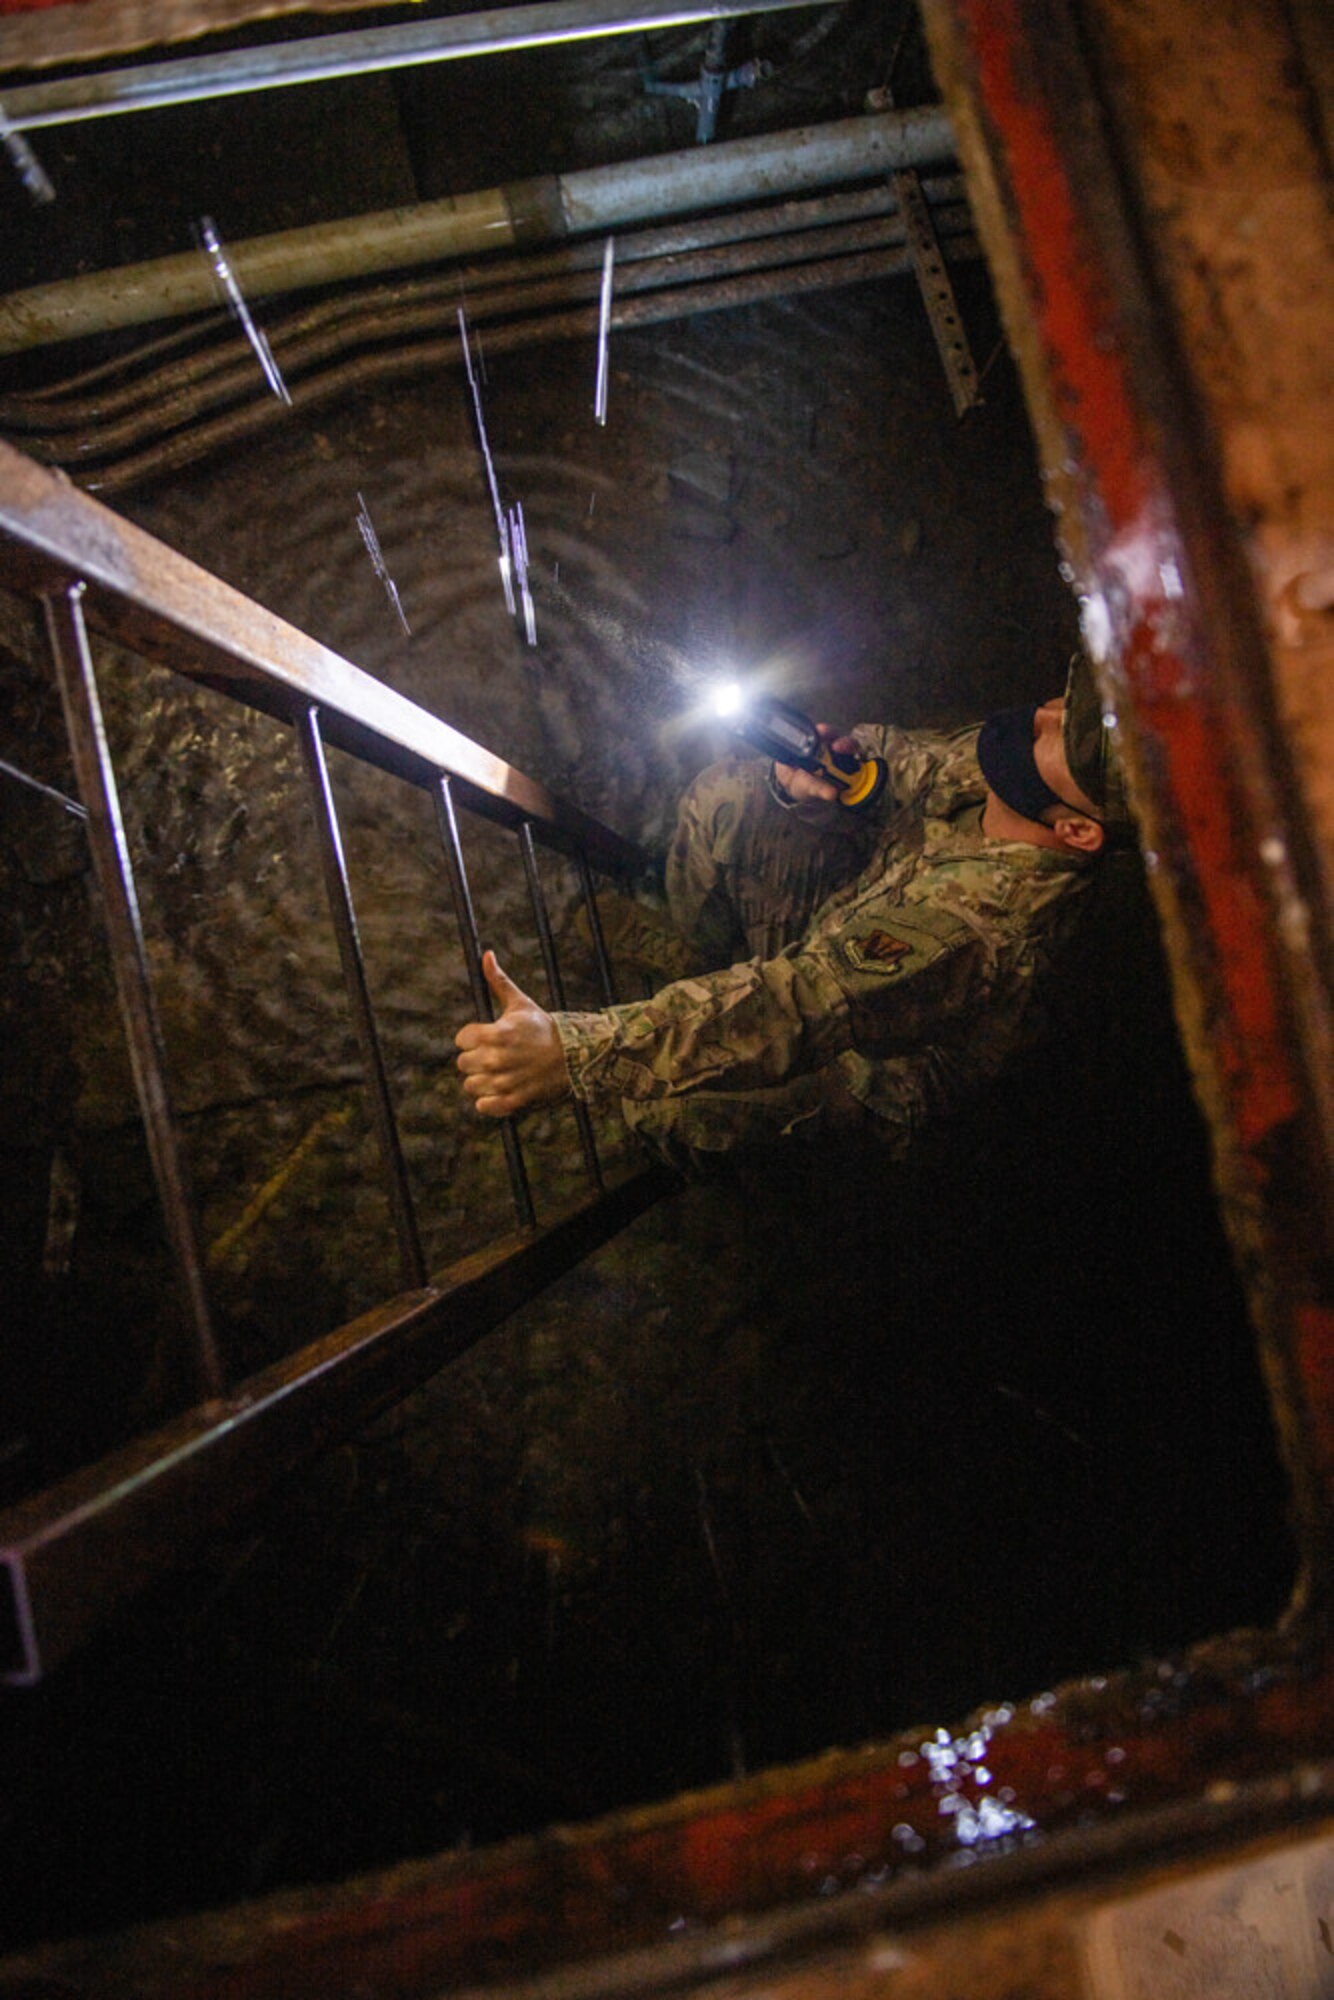 U.S. Air Force Master Sgt. Derek Hunter, 668th Alteration and Installation Squadron heating, ventilation, and air condition technician, reports damages caused by the severe winter storm lasting over five days, Feb. 19, 2021, at Joint Base San Antonio-Lackland, Texas.